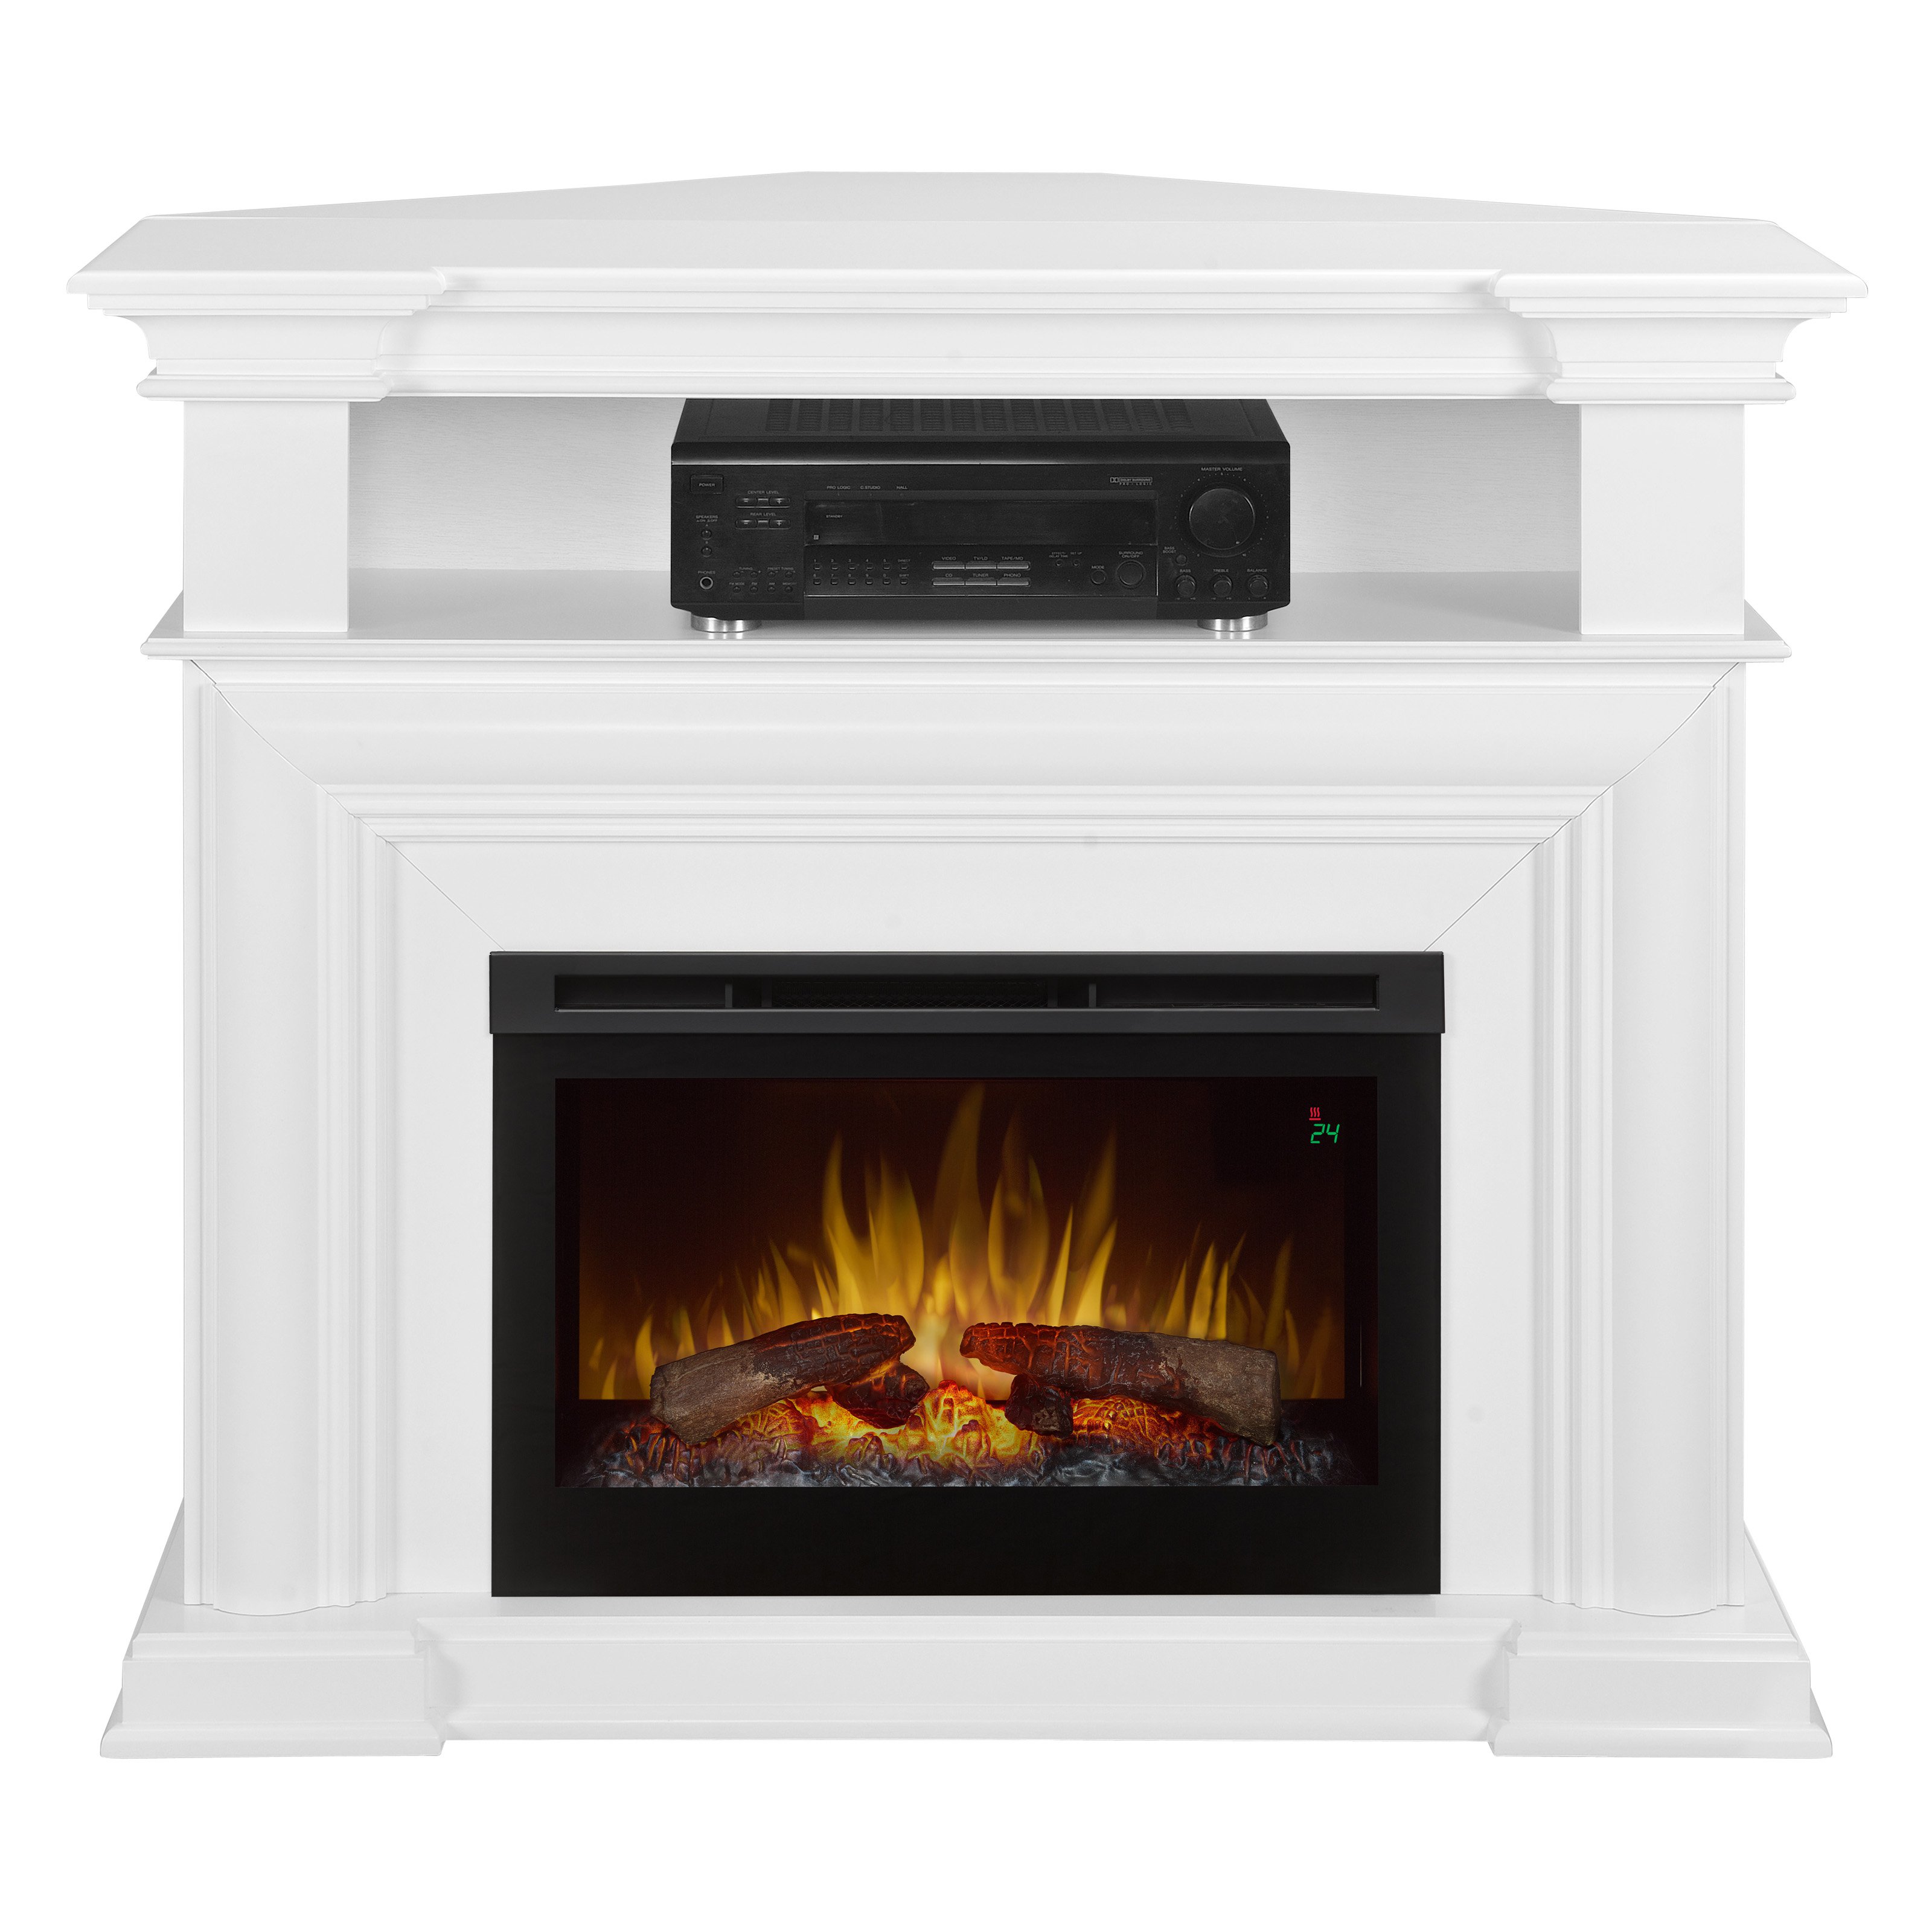 Decor Flame Electric Fireplace Unique Electric Fireplace with Convertible Corner Option and Drop Down Front